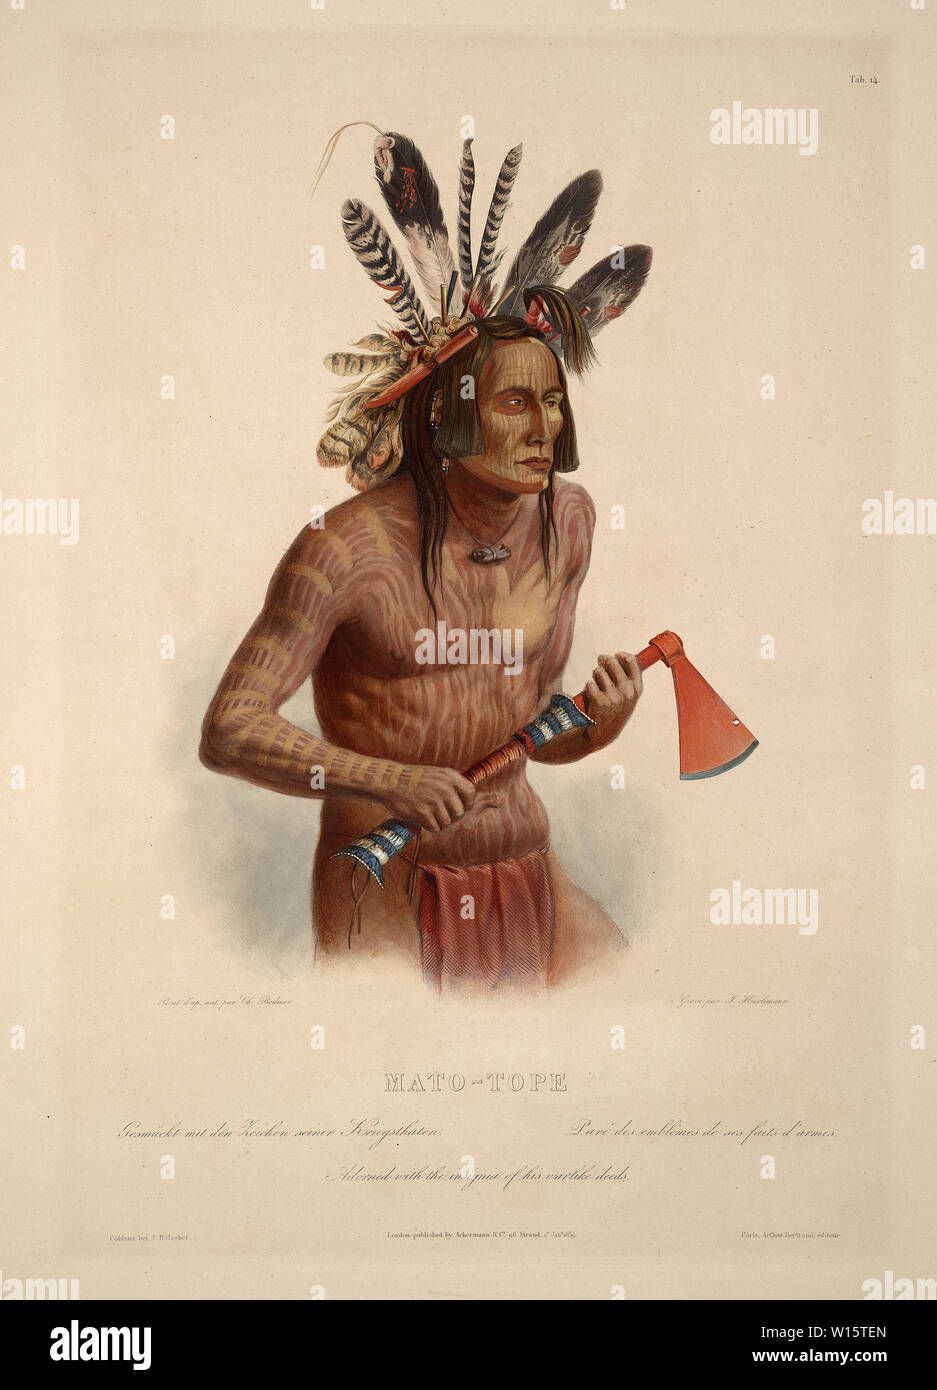 Mato-Tope, Adorned with the insignia of his warlike deeds - Karl Bodmer aquatint from Travels in the Interior of North America Stock Photo